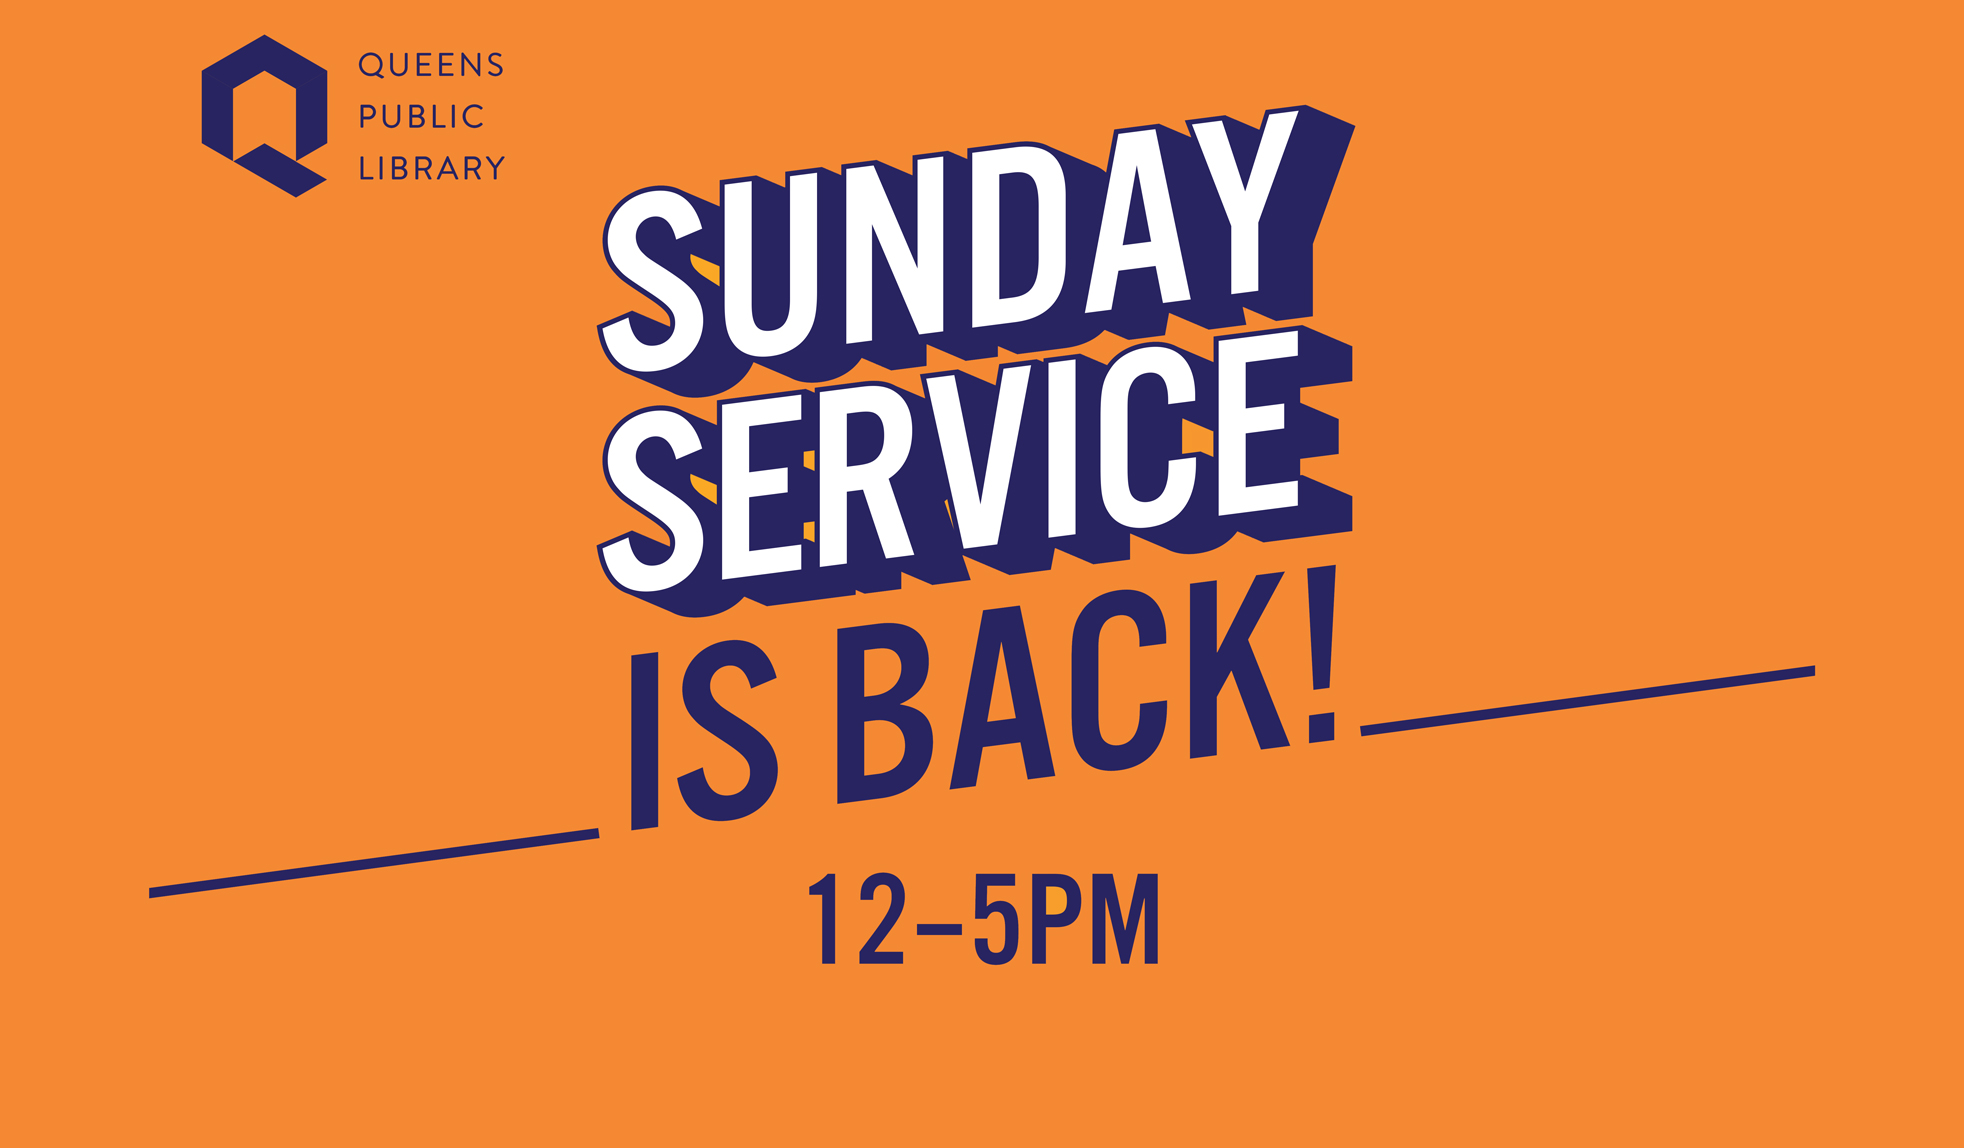 Central Library and Flushing Library are now open on Sundays from 12-5PM.